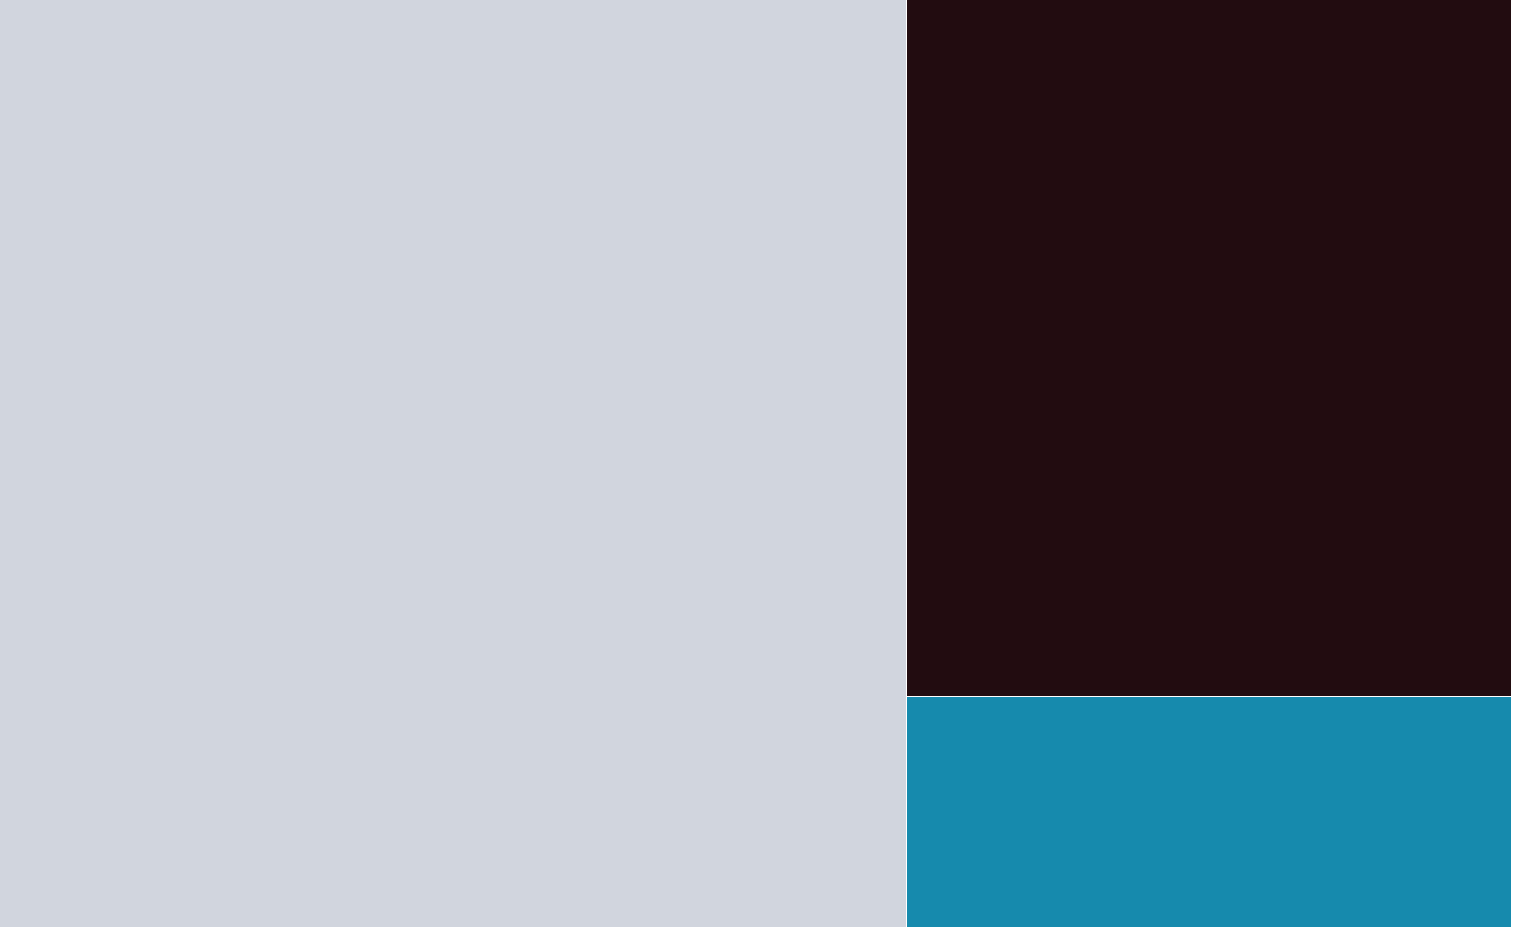 colorpalette